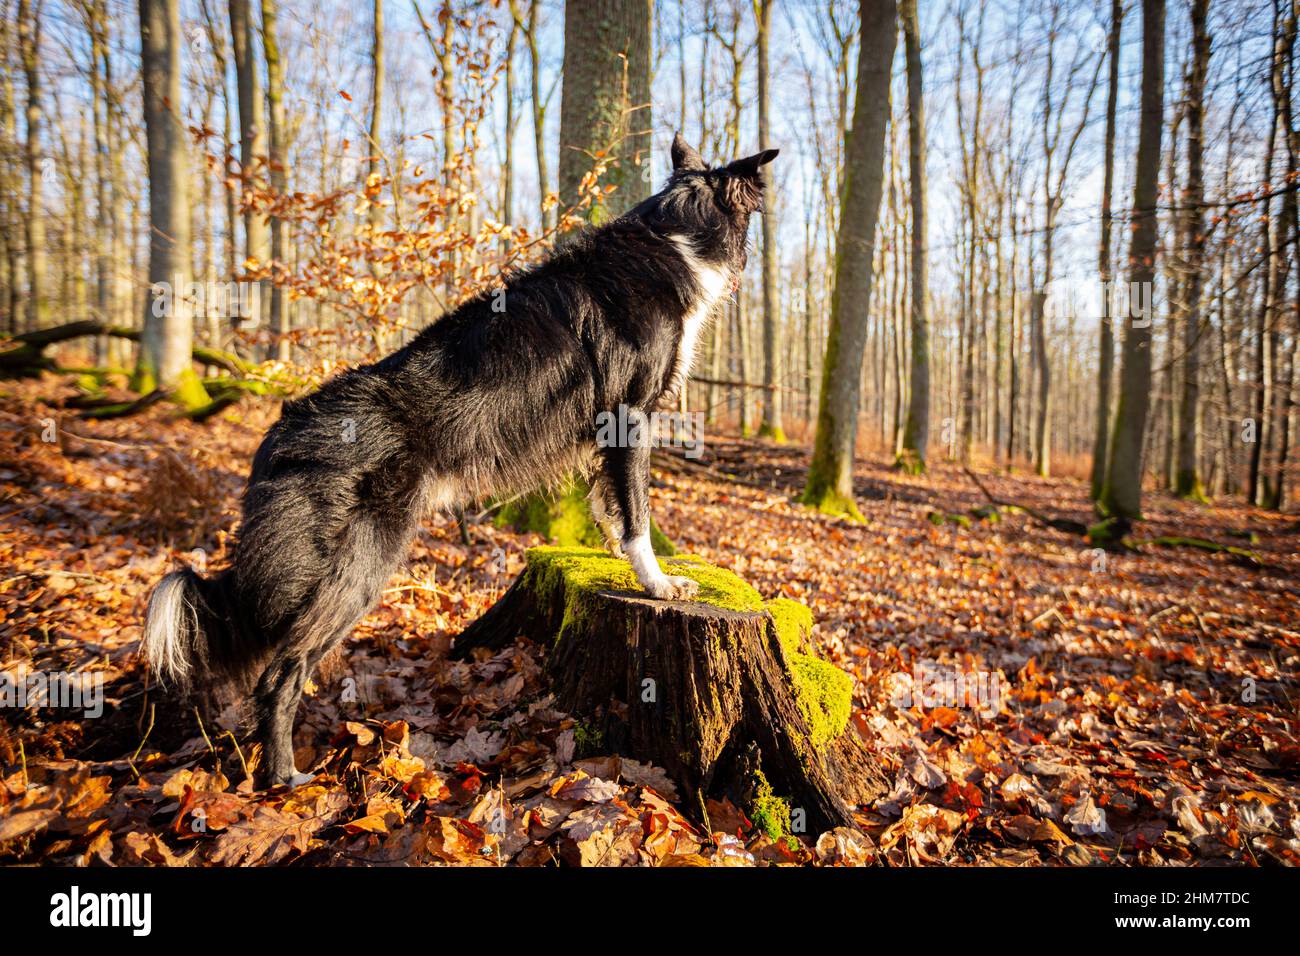 Dog in the forest on a log. Border collie dog sitting on a log looking away hearing something in the forest. Stock Photo